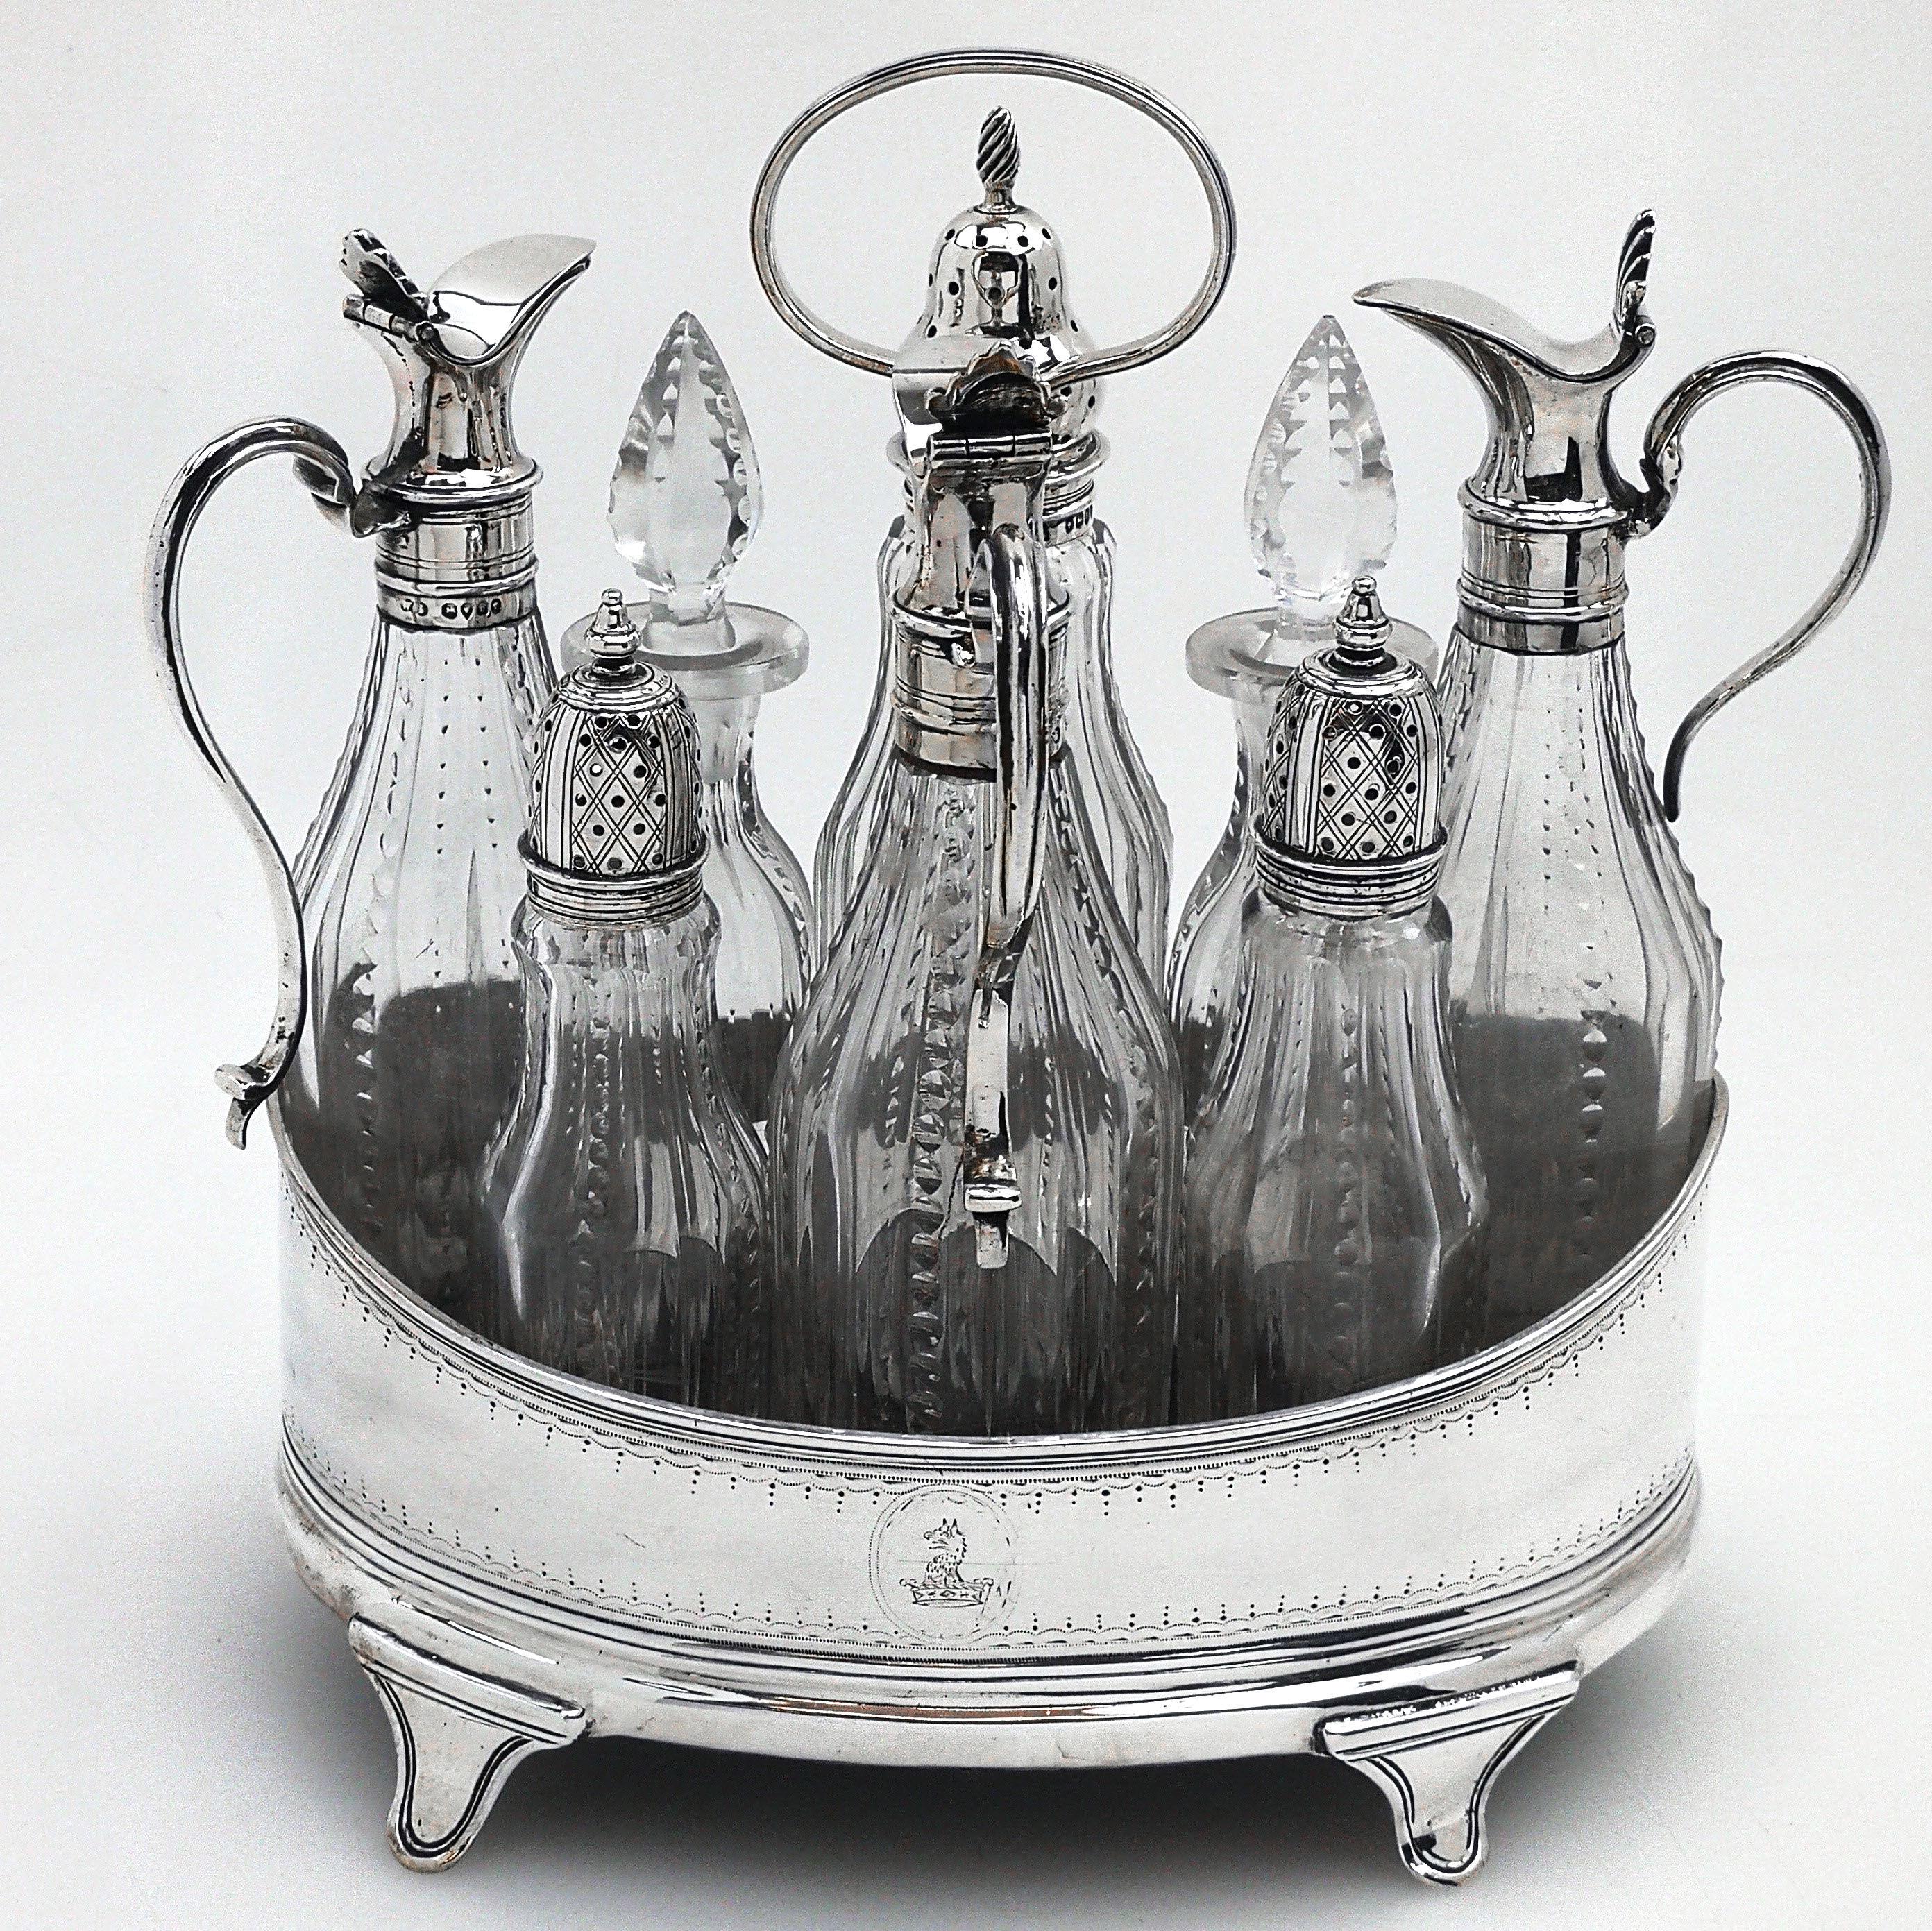 A lovely antique Victorian solid Silver cruet set in an oval stand. The cruet stand has an upwardly curved rim with a reeded band applied and features a subtle engraved design around the upper and lower rims, and a matched pair of crests engraved.